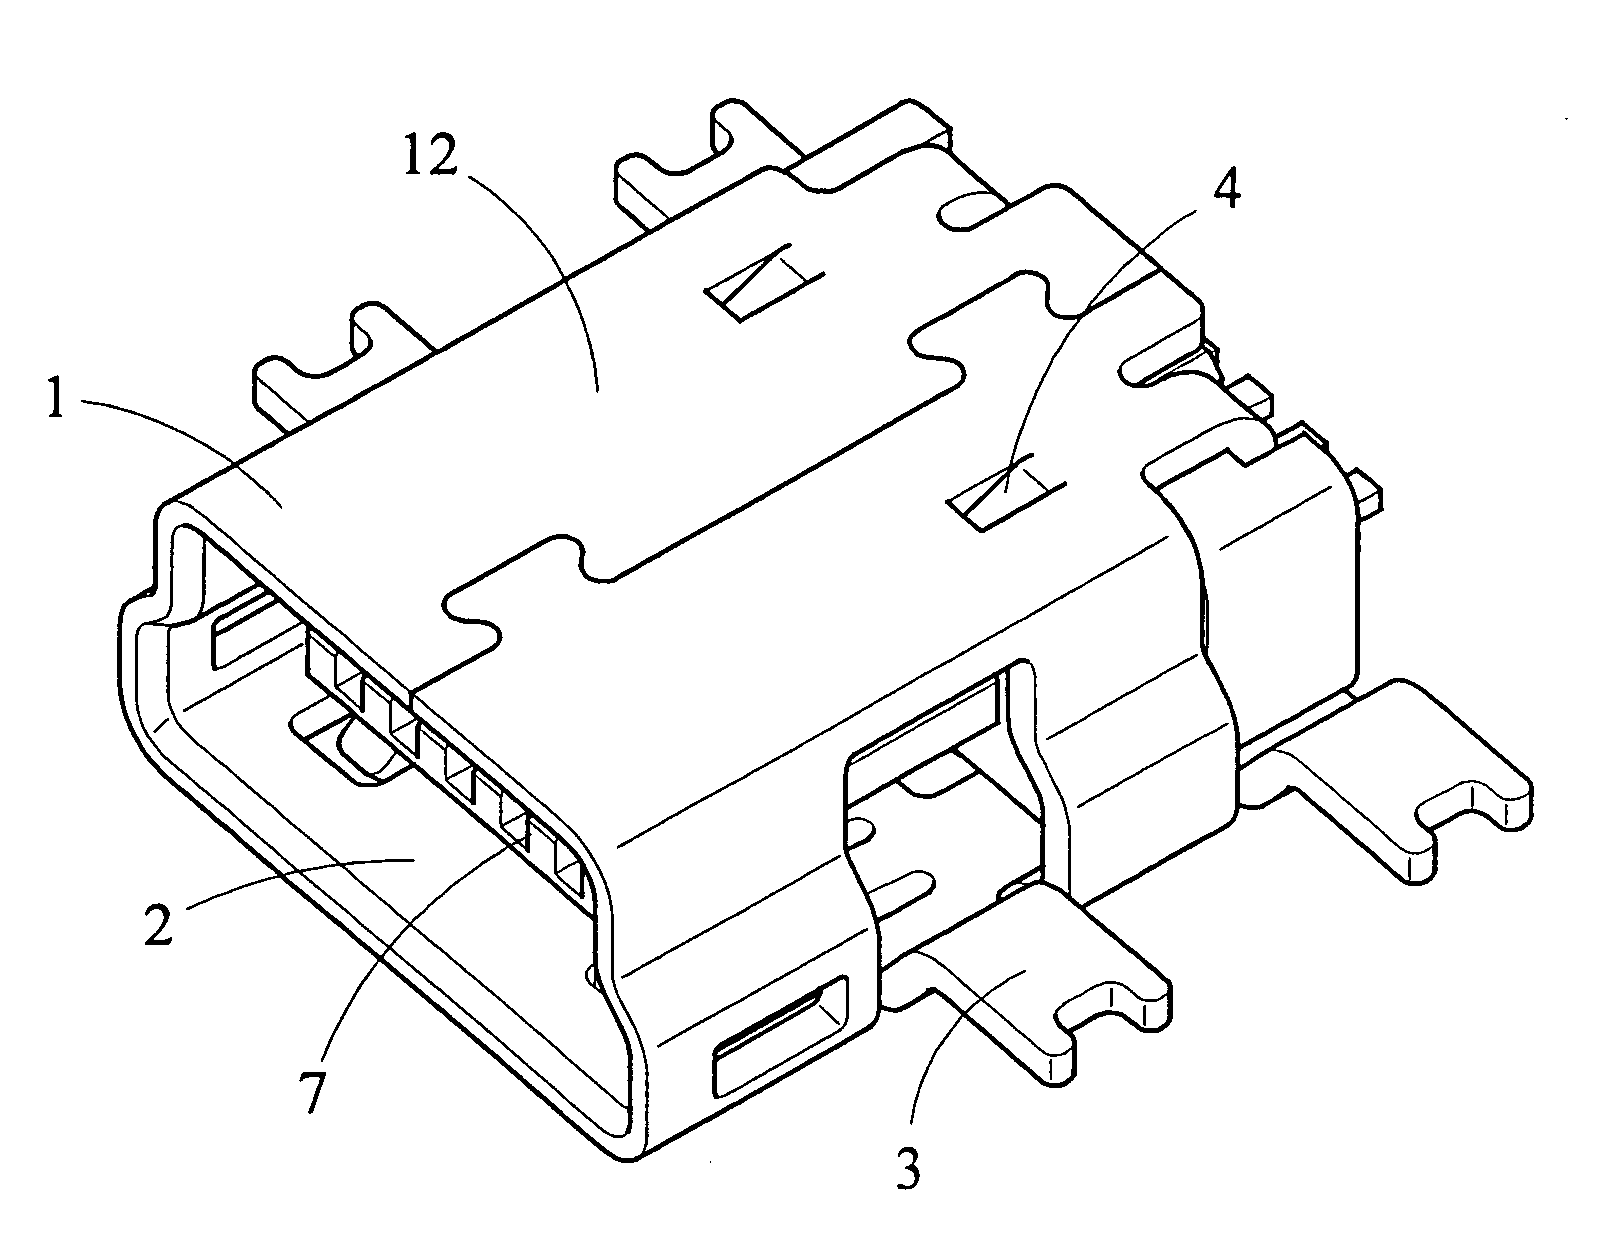 Shell for electrical connector